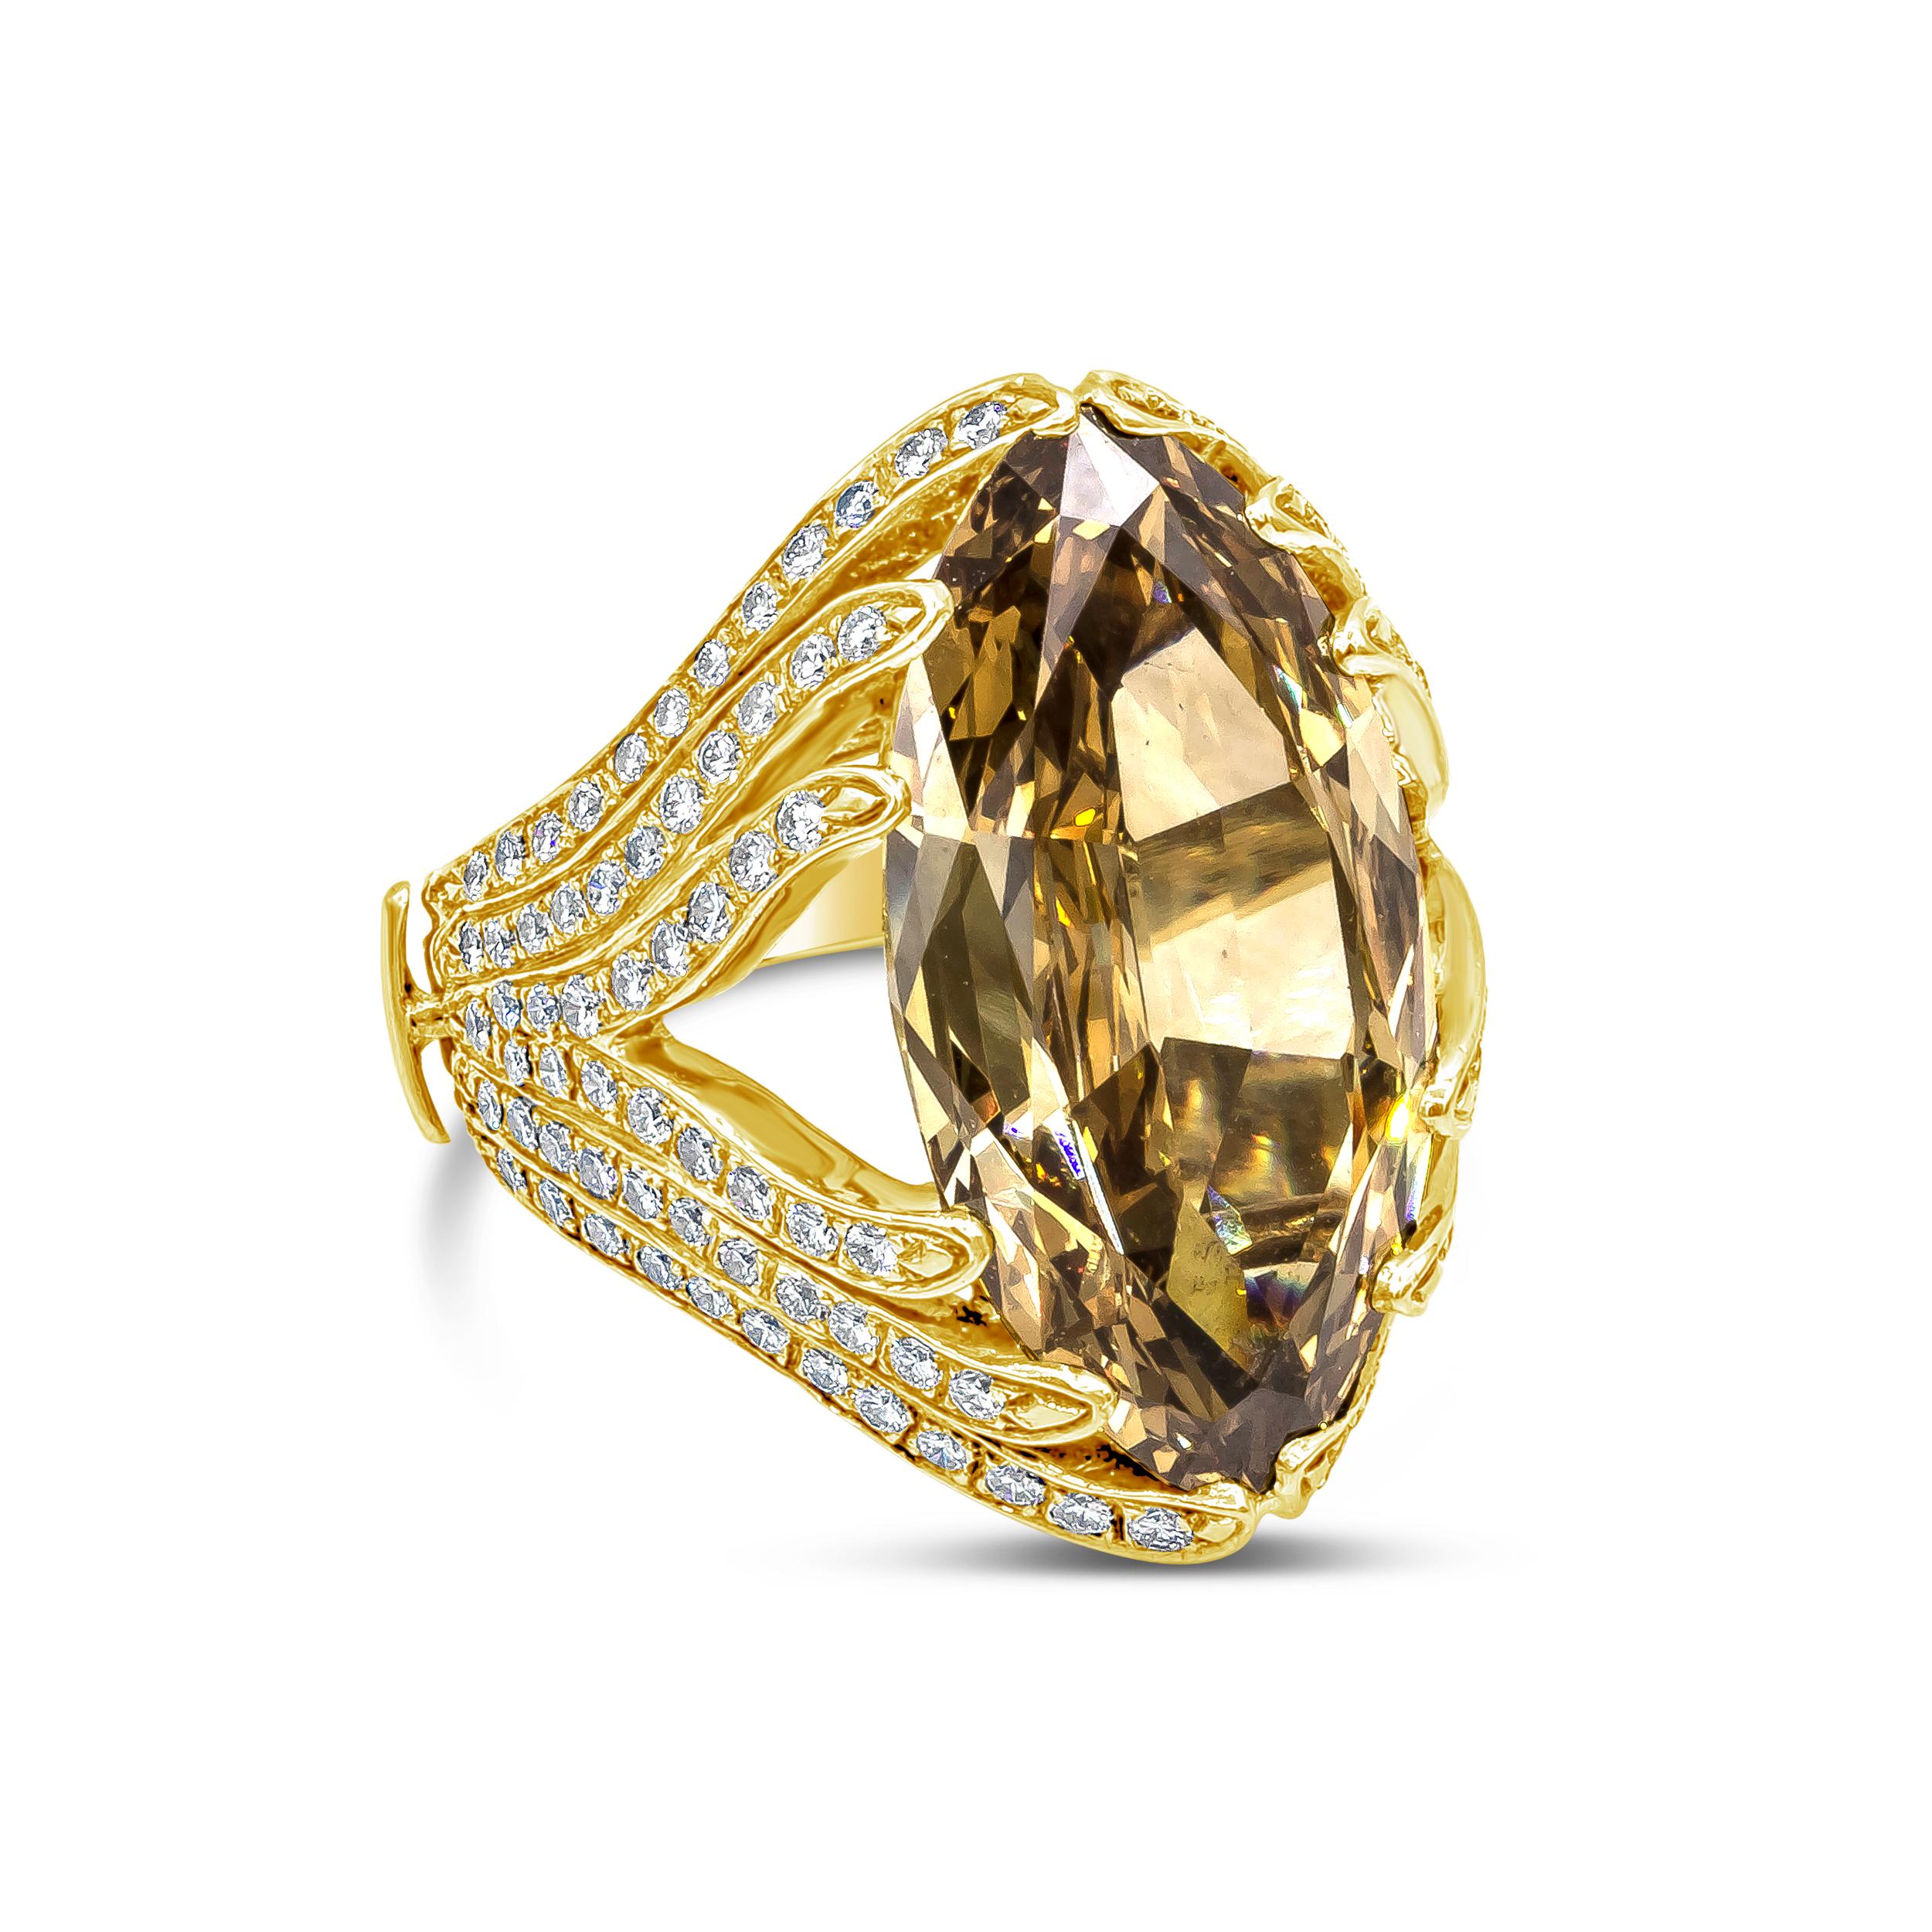 An important and color-rich ring showcasing a GIA Certified 10.07 carat total marquise cut diamond,  Fancy Deep Brown Yellow Color, and SI1 in Clarity. The center stone is set in an intricately-designed band accented with fine dazzling round